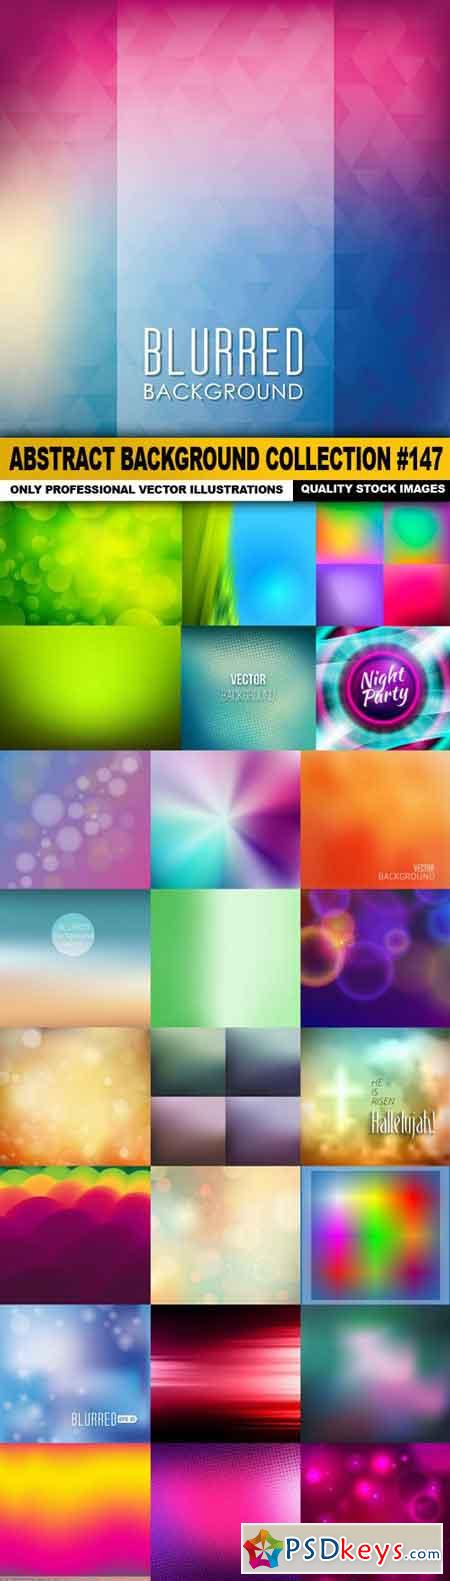 Abstract Background Collection #147 - 25 Vector